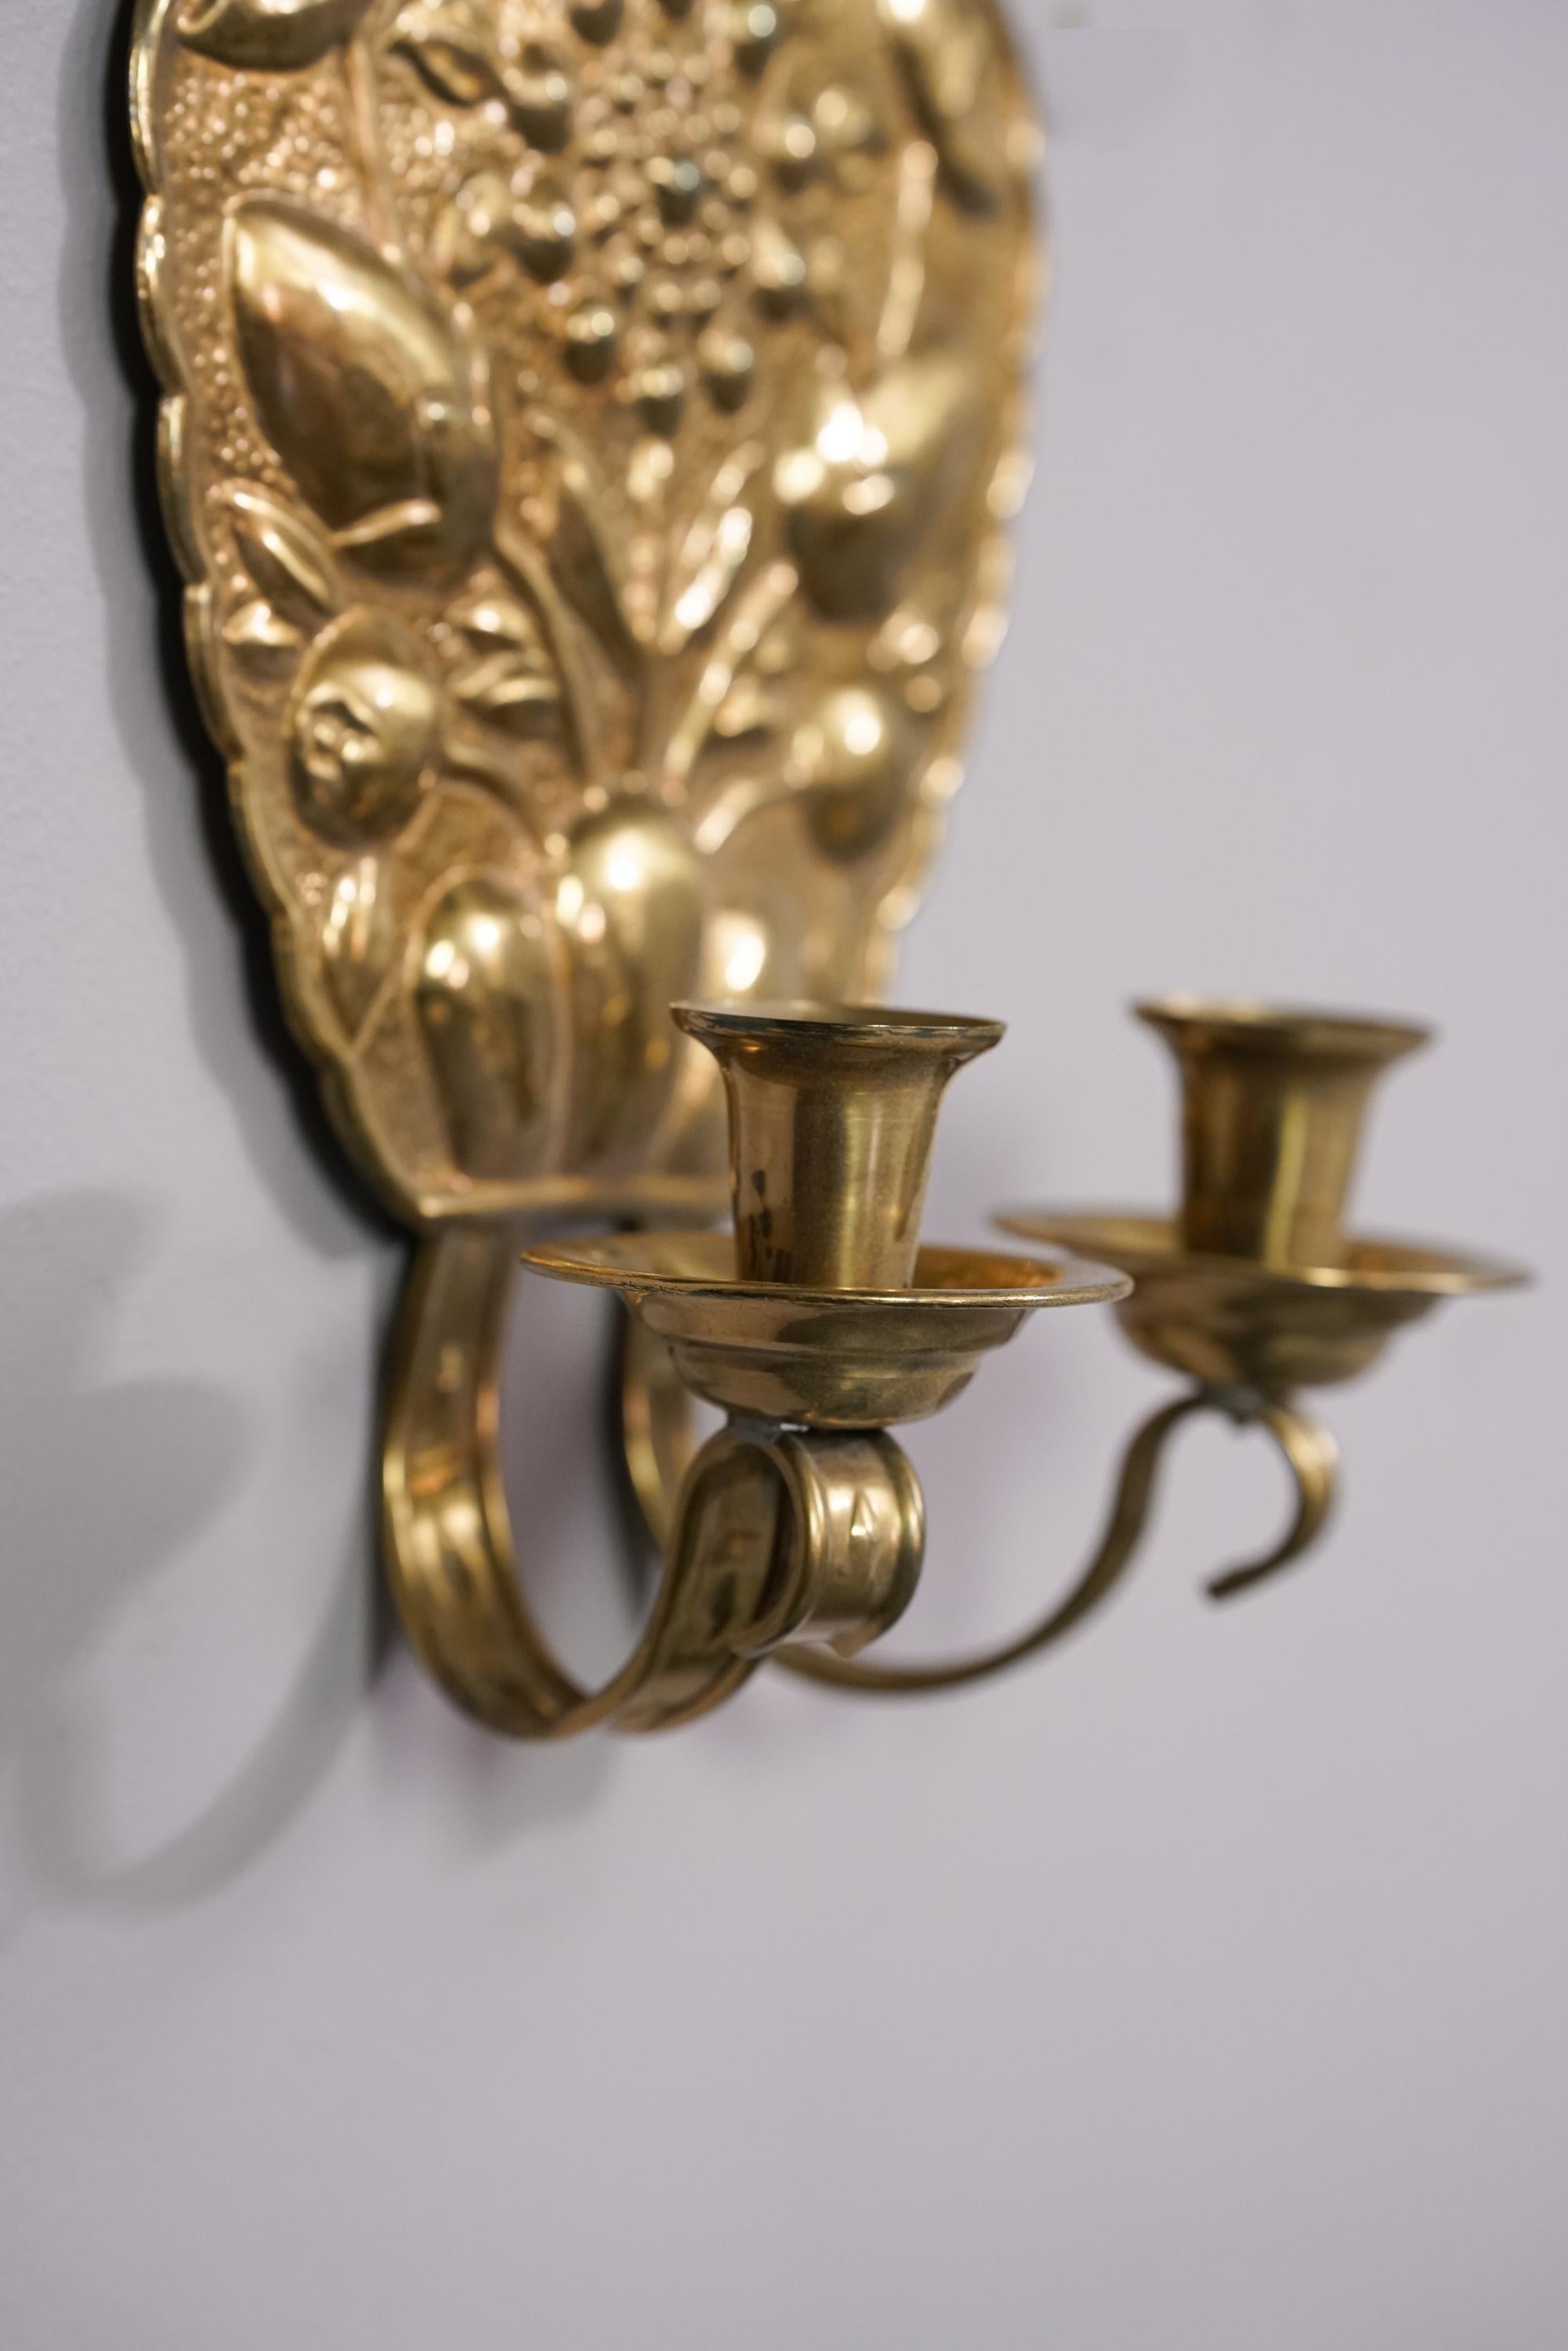 Forged Finnish Brass Candle Sconce Model 1101 by Taidetakomo Hakkarainen, 1920s/1930s For Sale